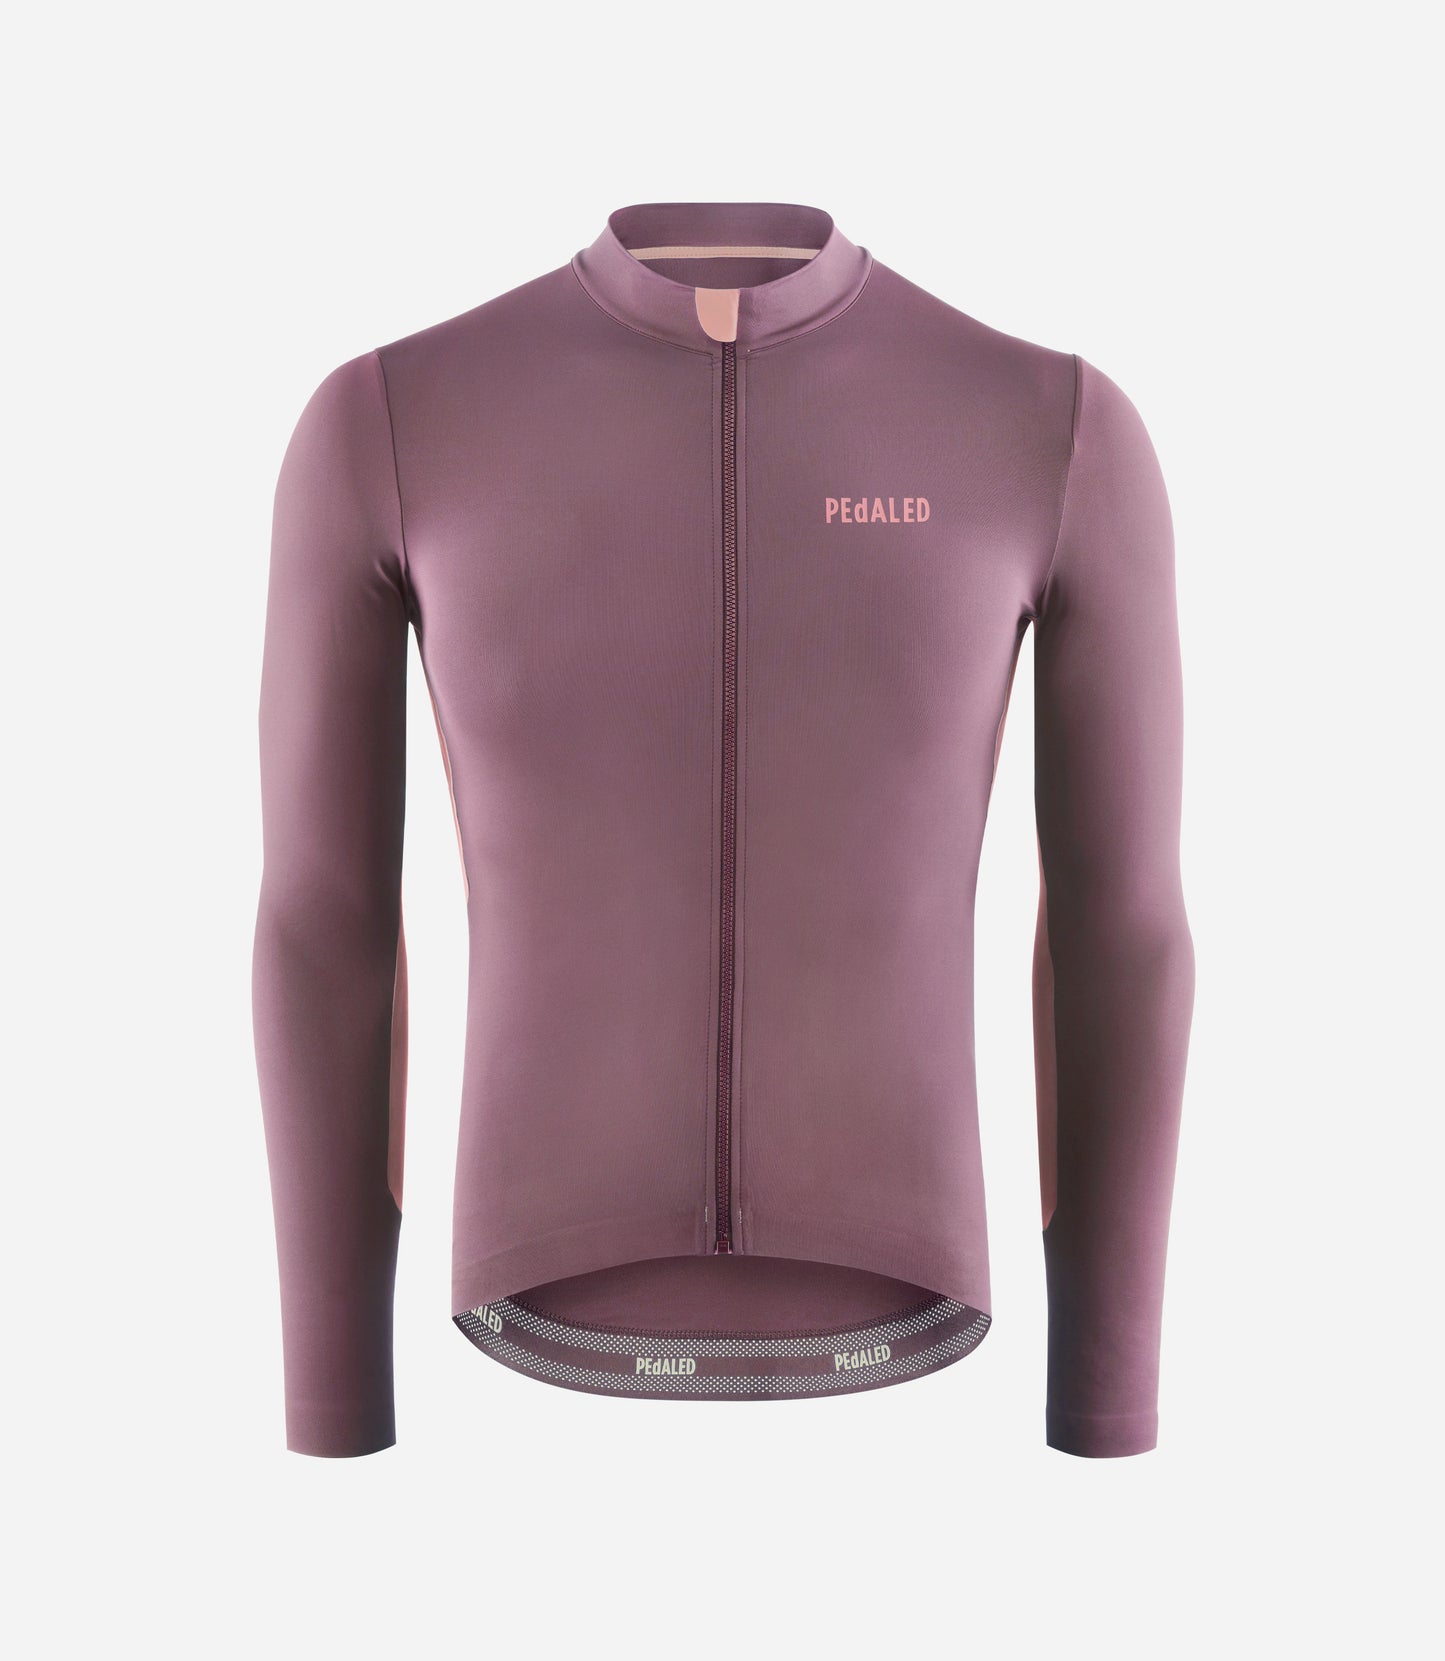 24WJSEL10PE_1_men cycling long sleeve jersey purple element front pedaled